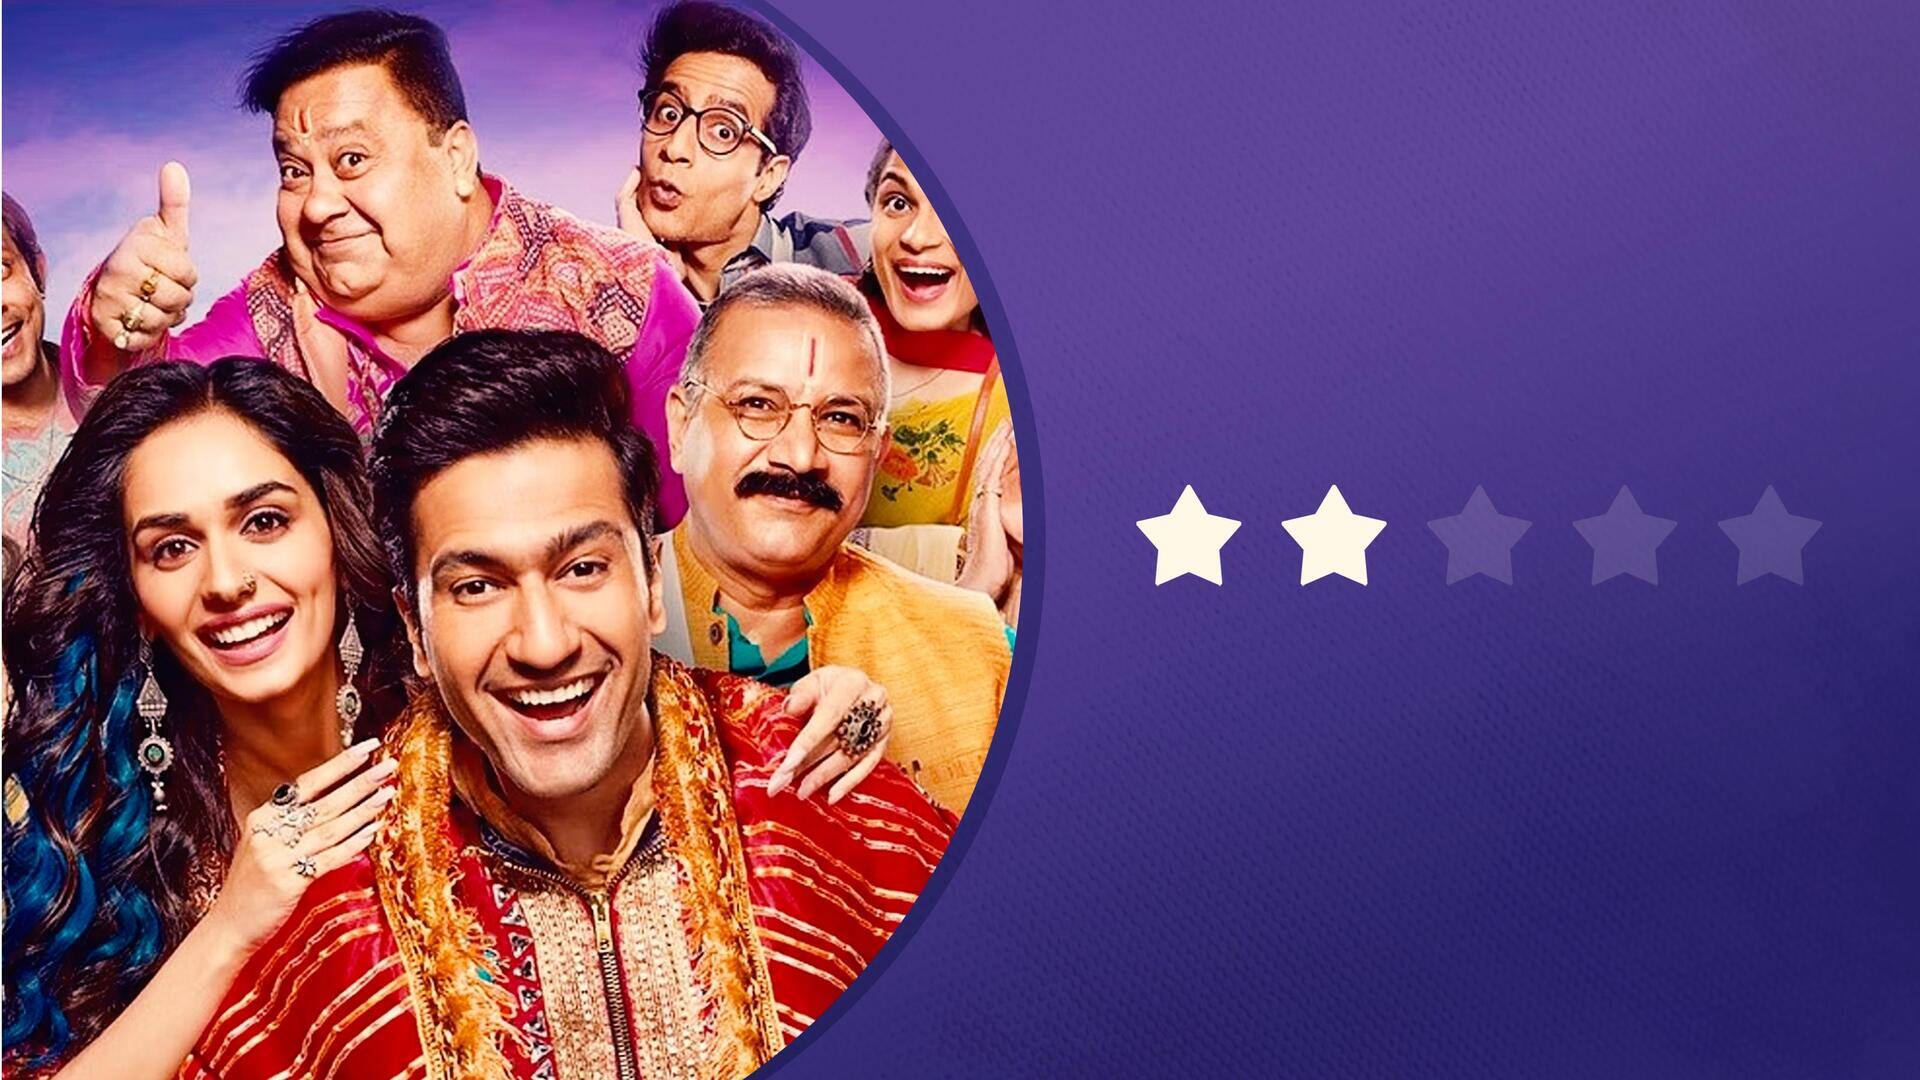 'The Great Indian Family' review: Strong performances, but scattershot drama